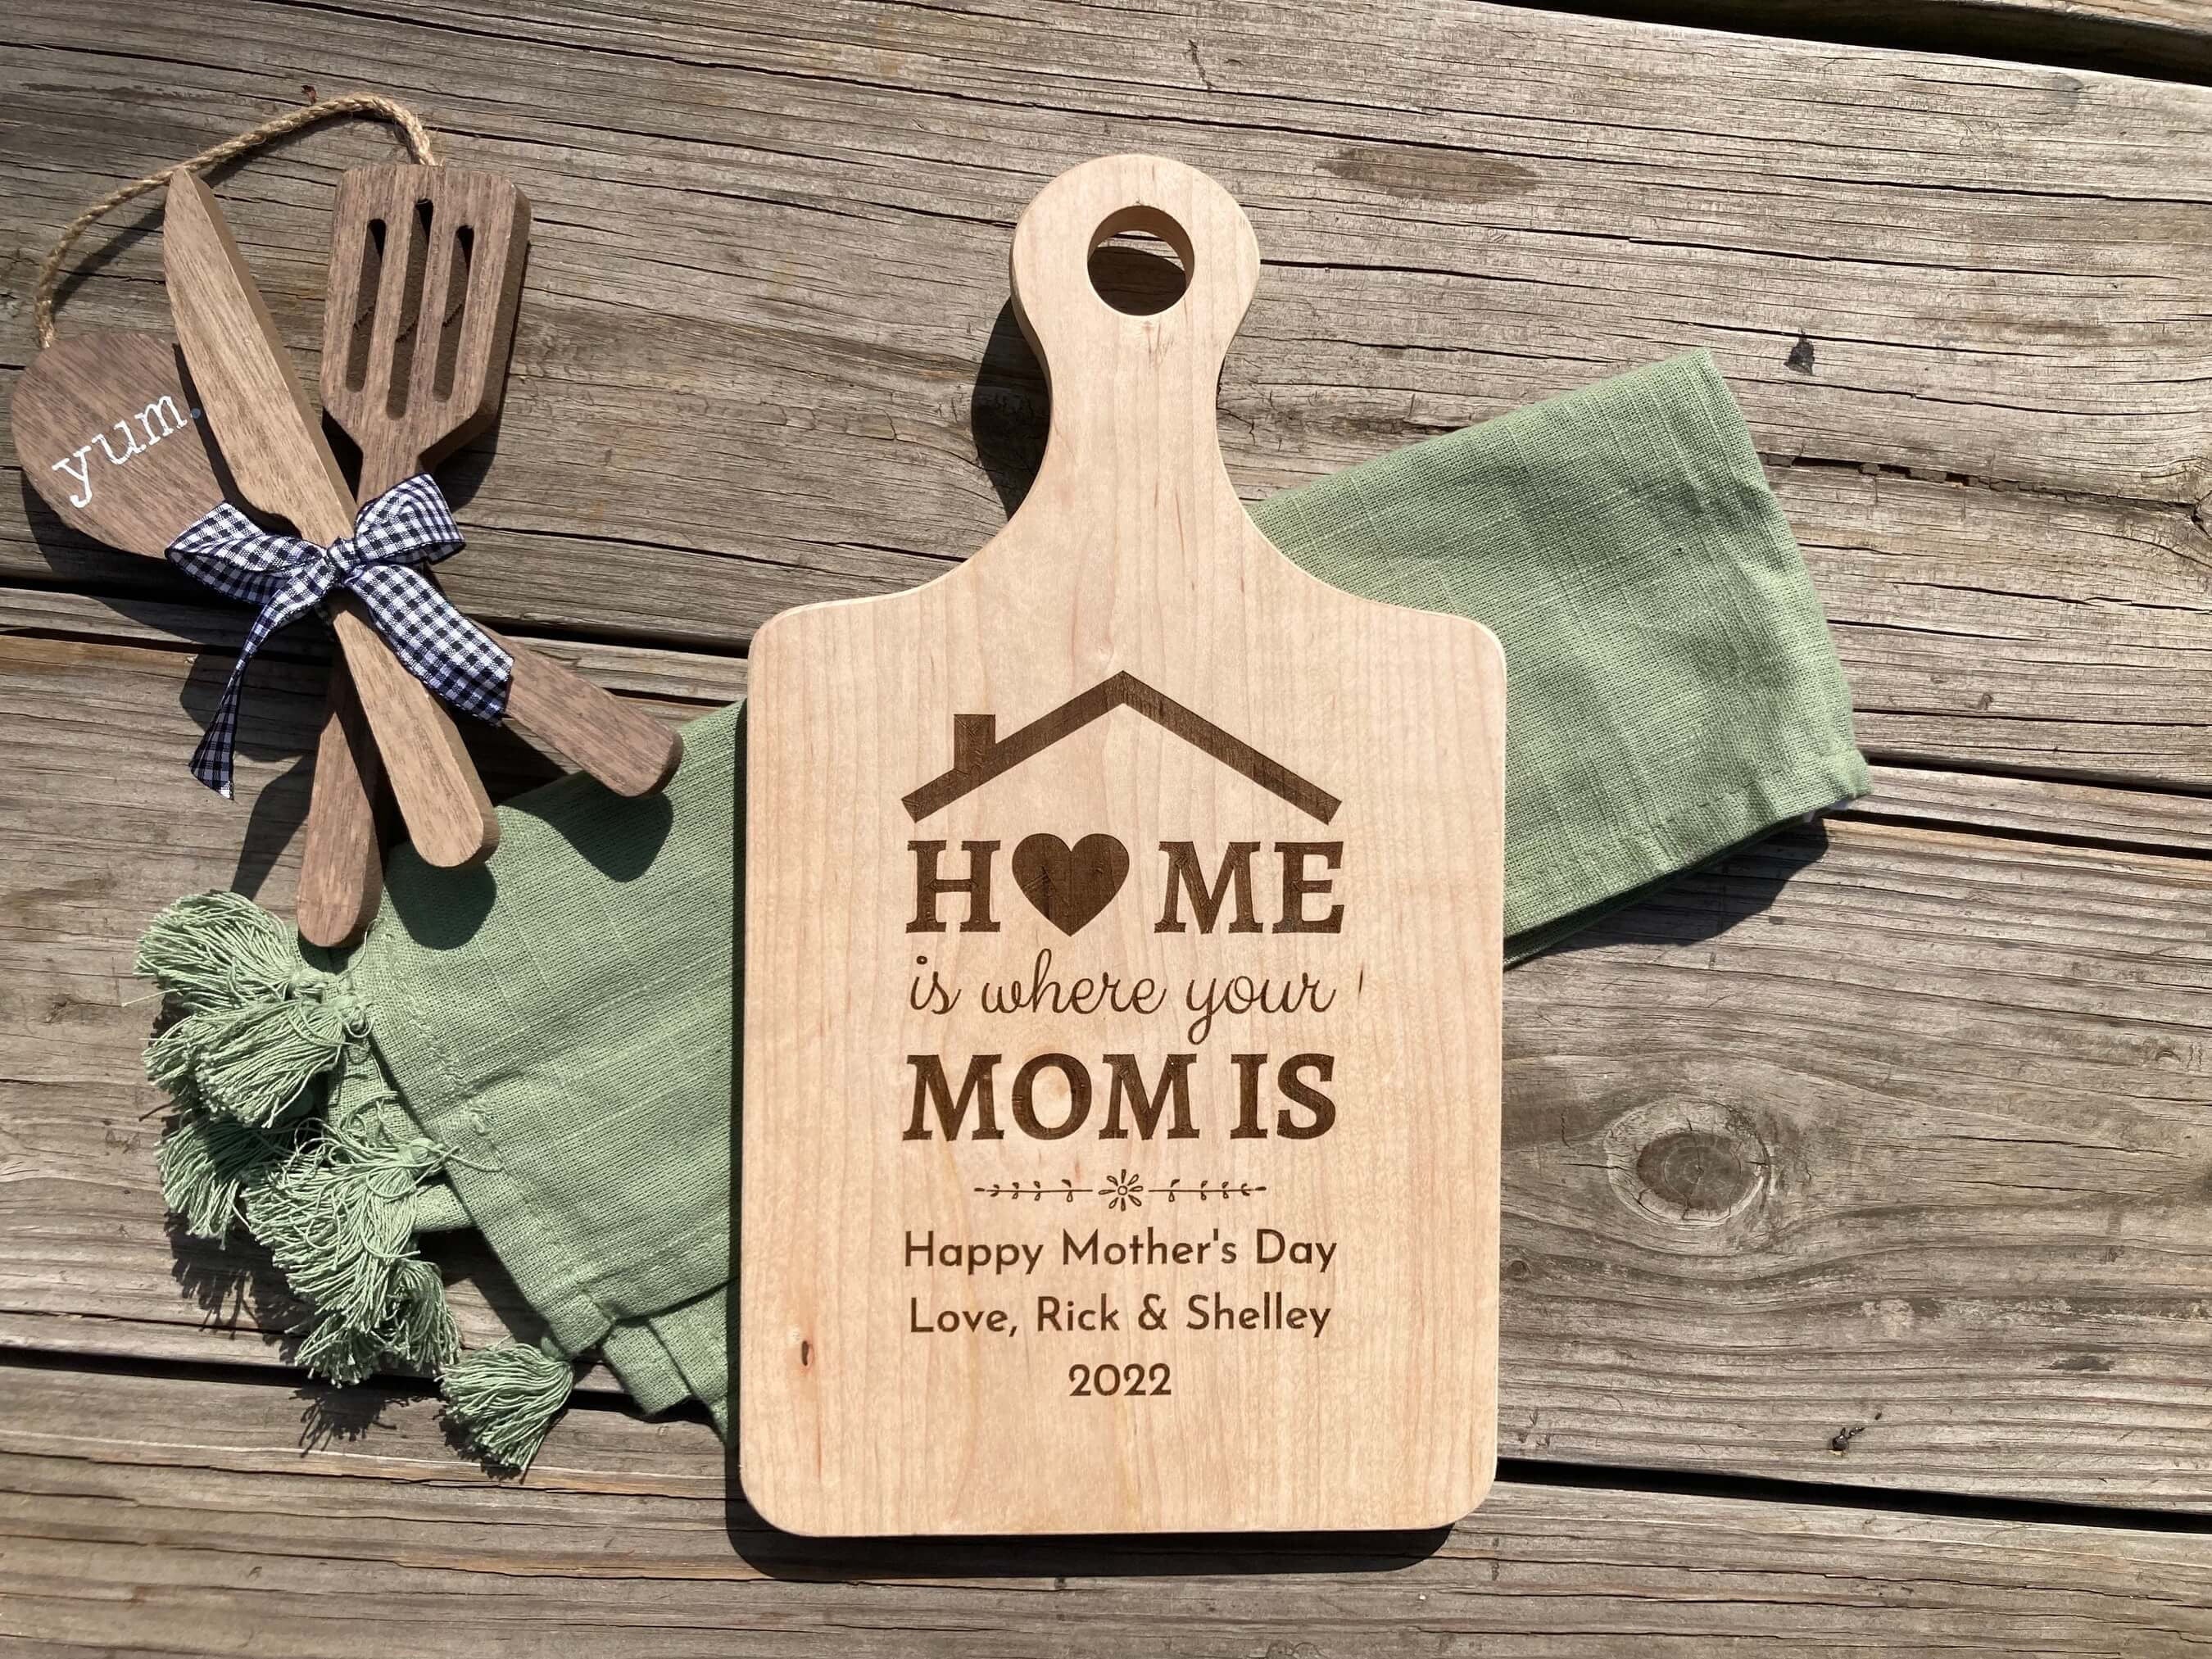 MOTHER'S DAY PERSONALIZED gift,Mom's custom cutting board charcuterie bread board,Best Mother's day Gift Idea,Gift Idea for Her Anniversary